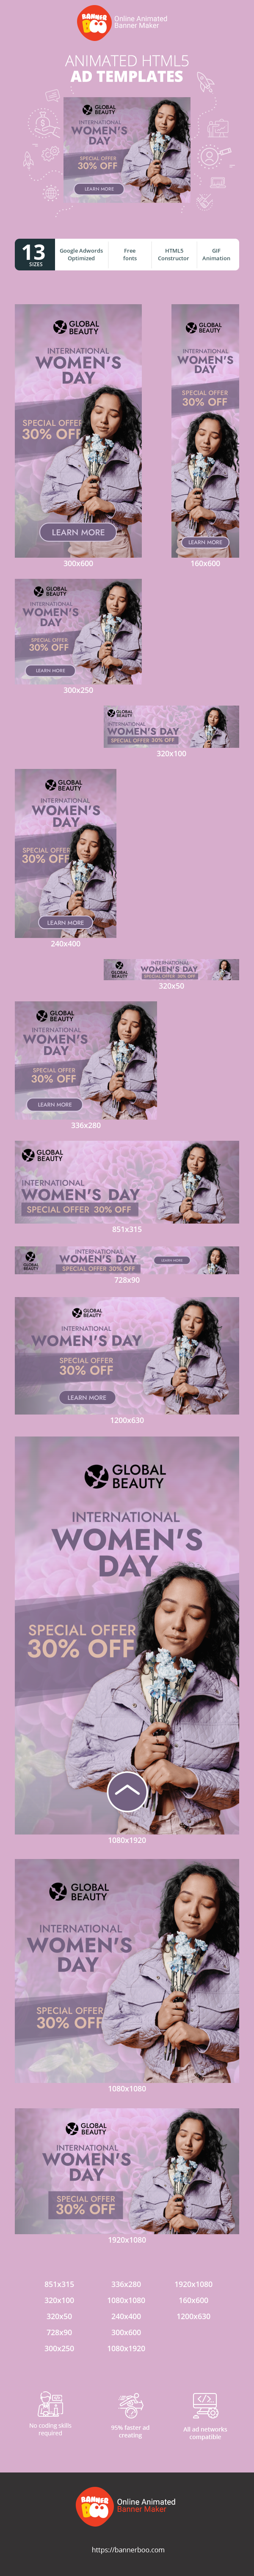 Banner ad template — International Women's Day — Special Offer 30% Off